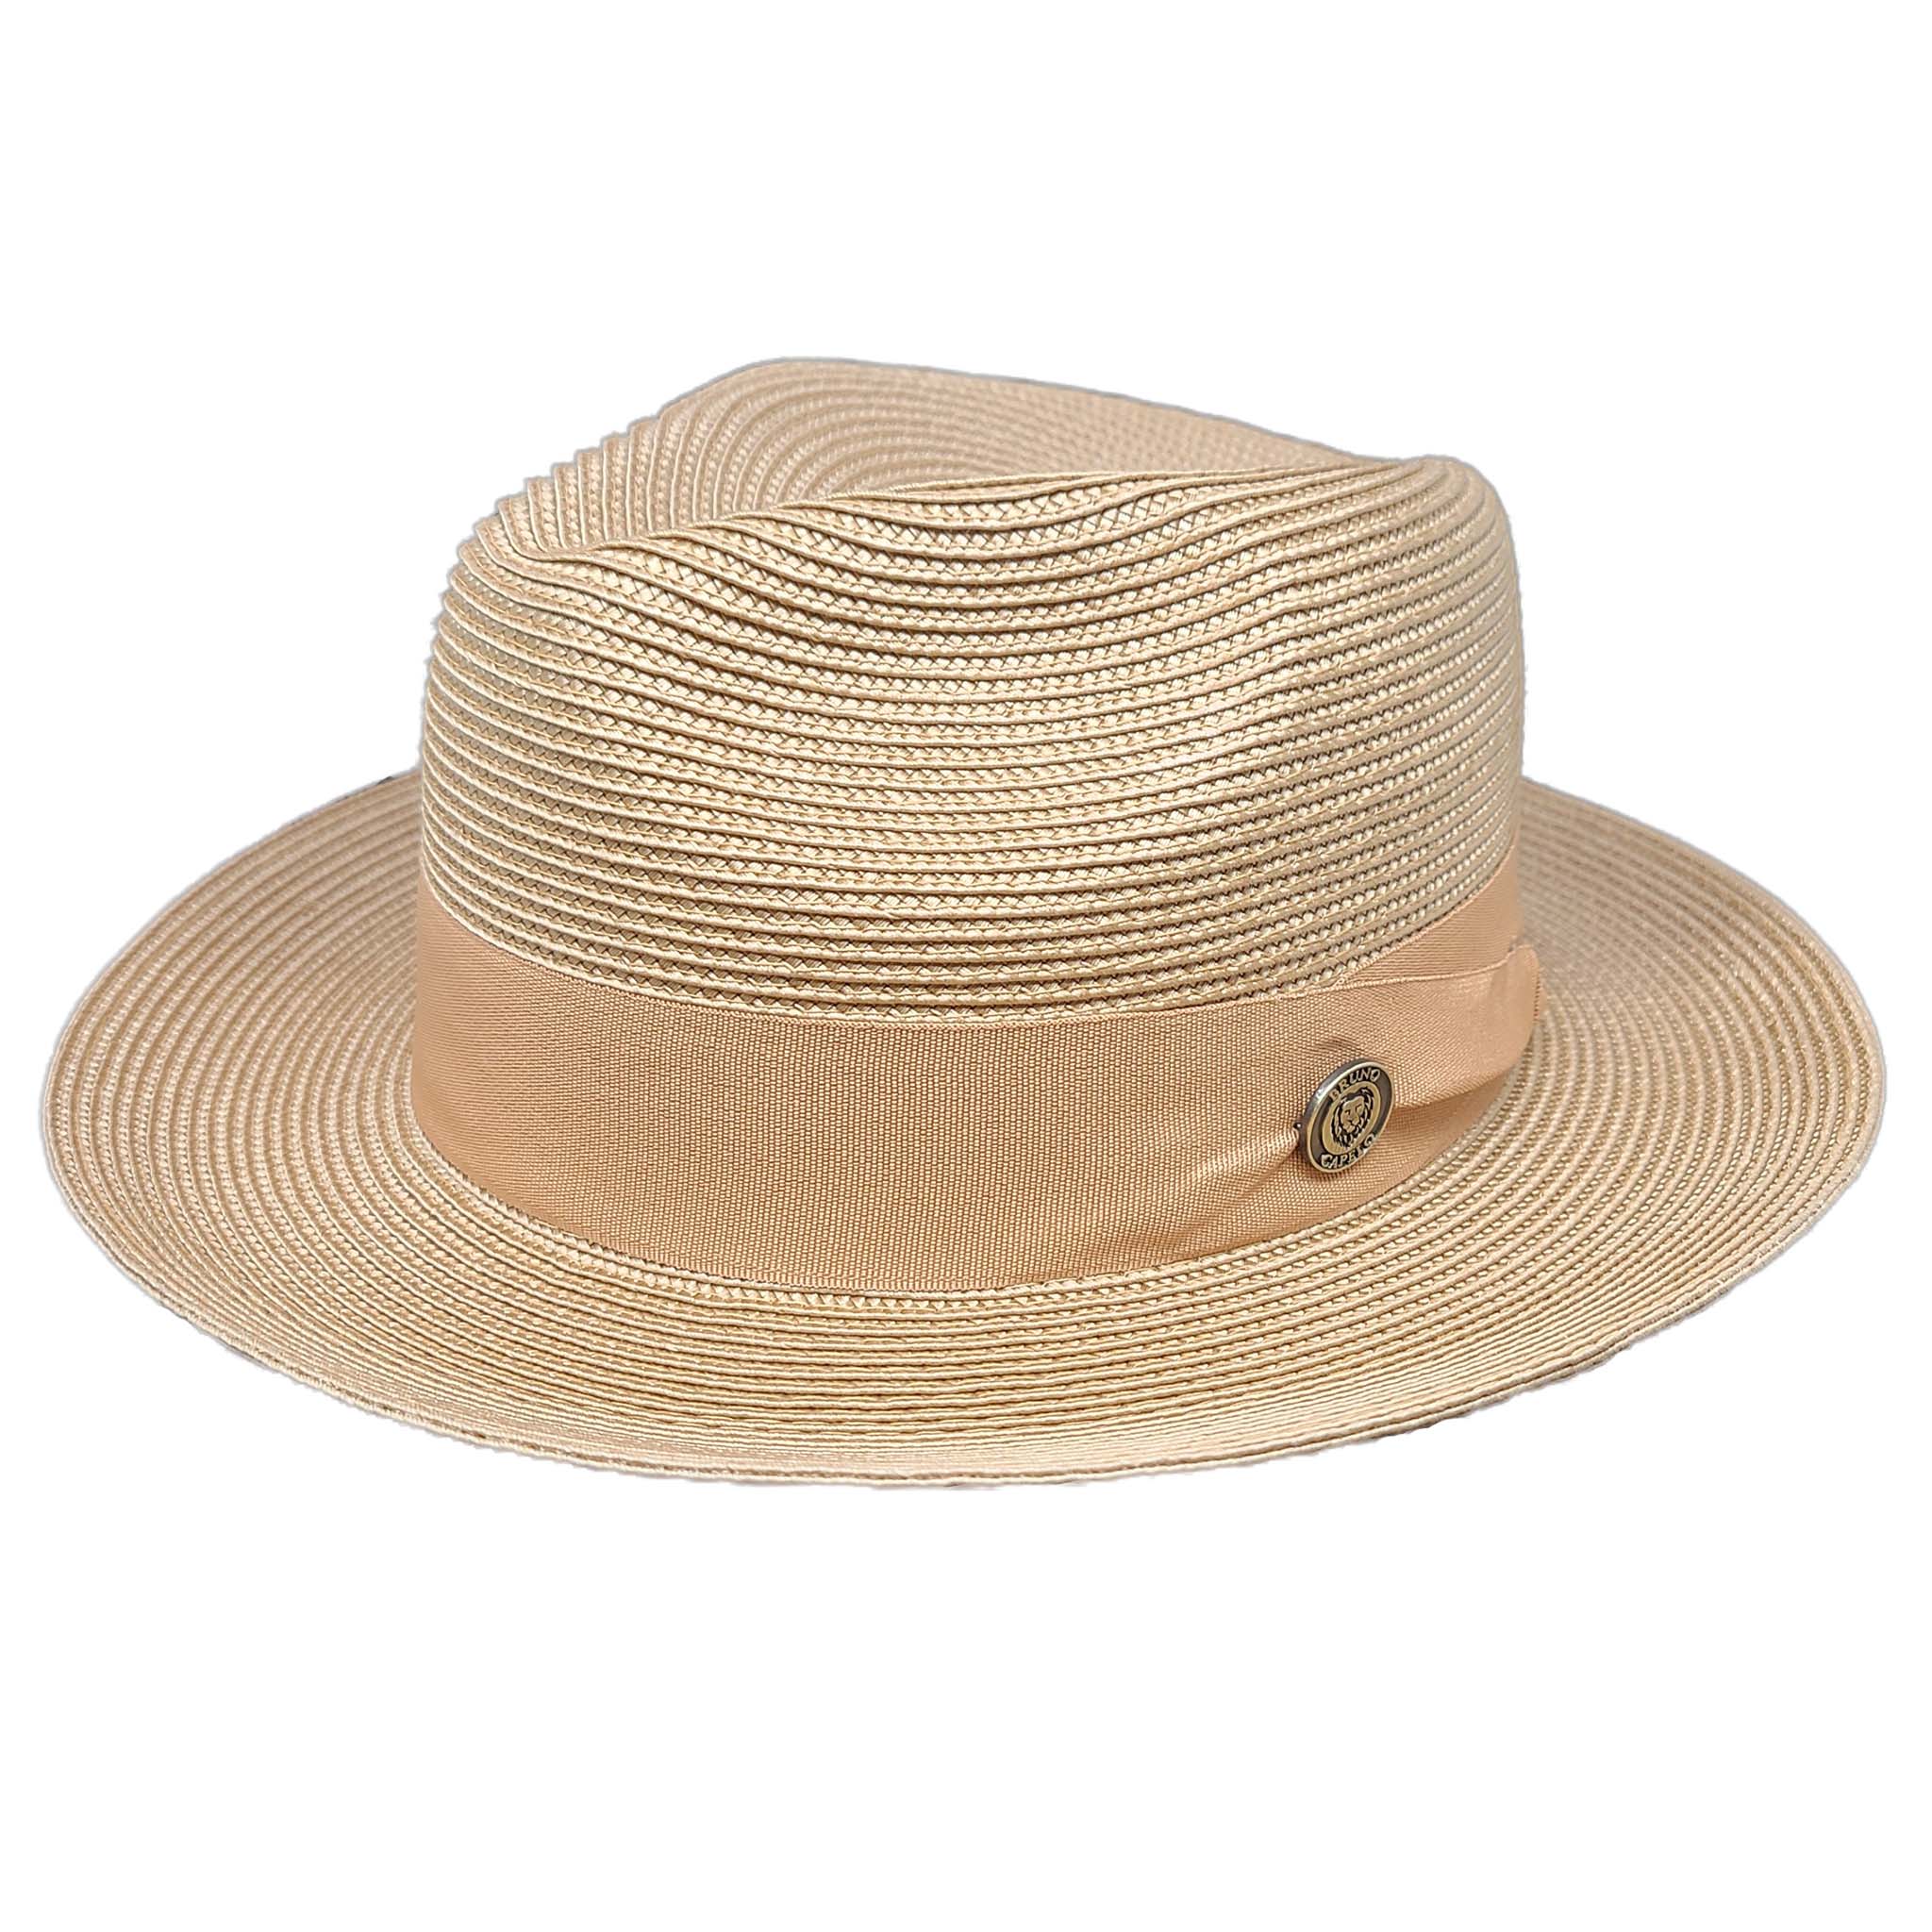 Camel Straw Fedora Hat - Lightweight and stylish accessory for men and women